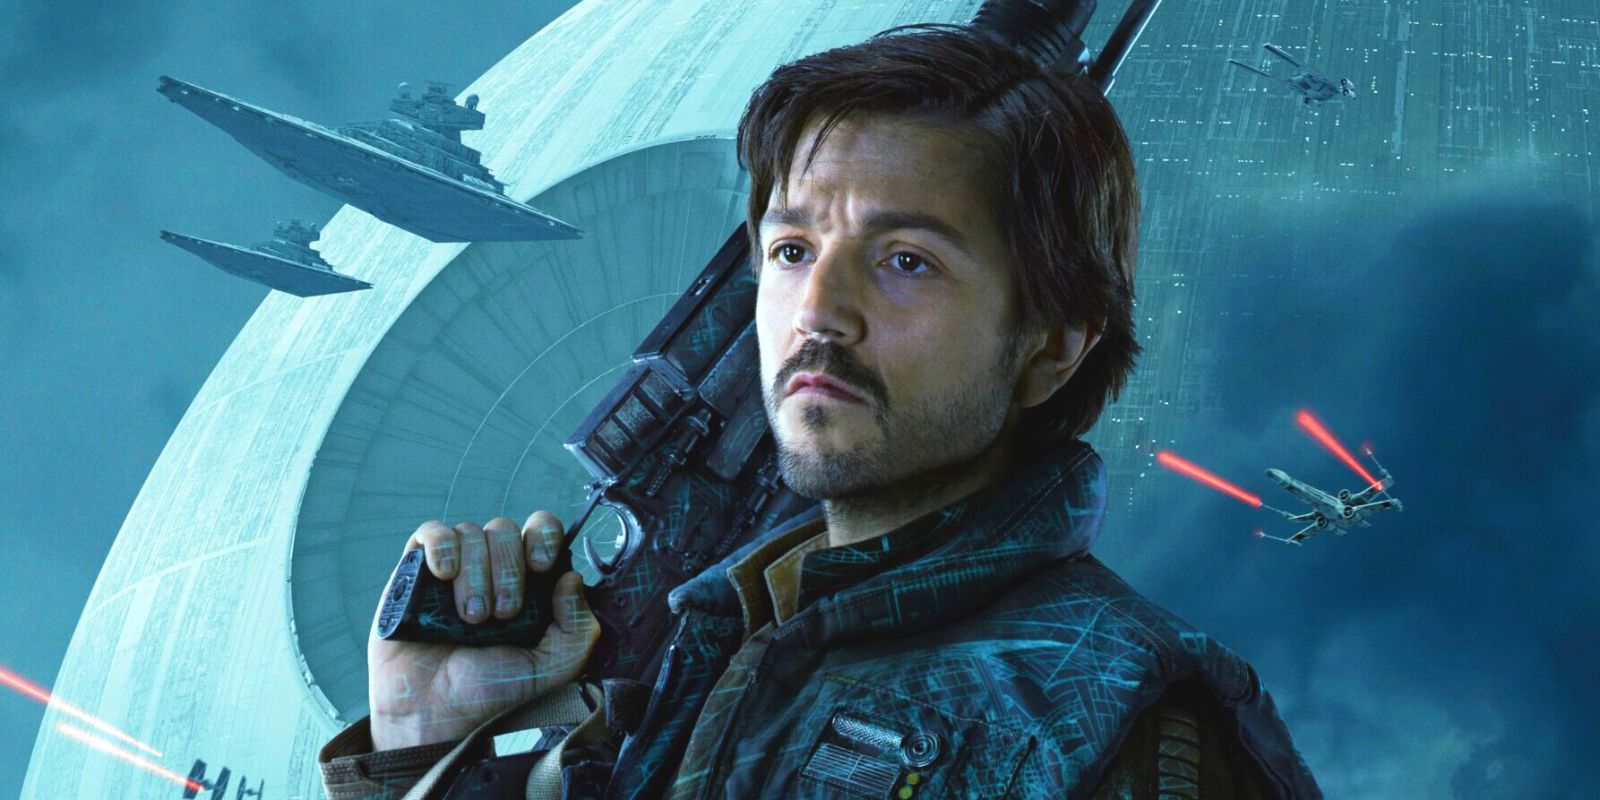 Cassian Andor with a blaster in Rogue One promo.